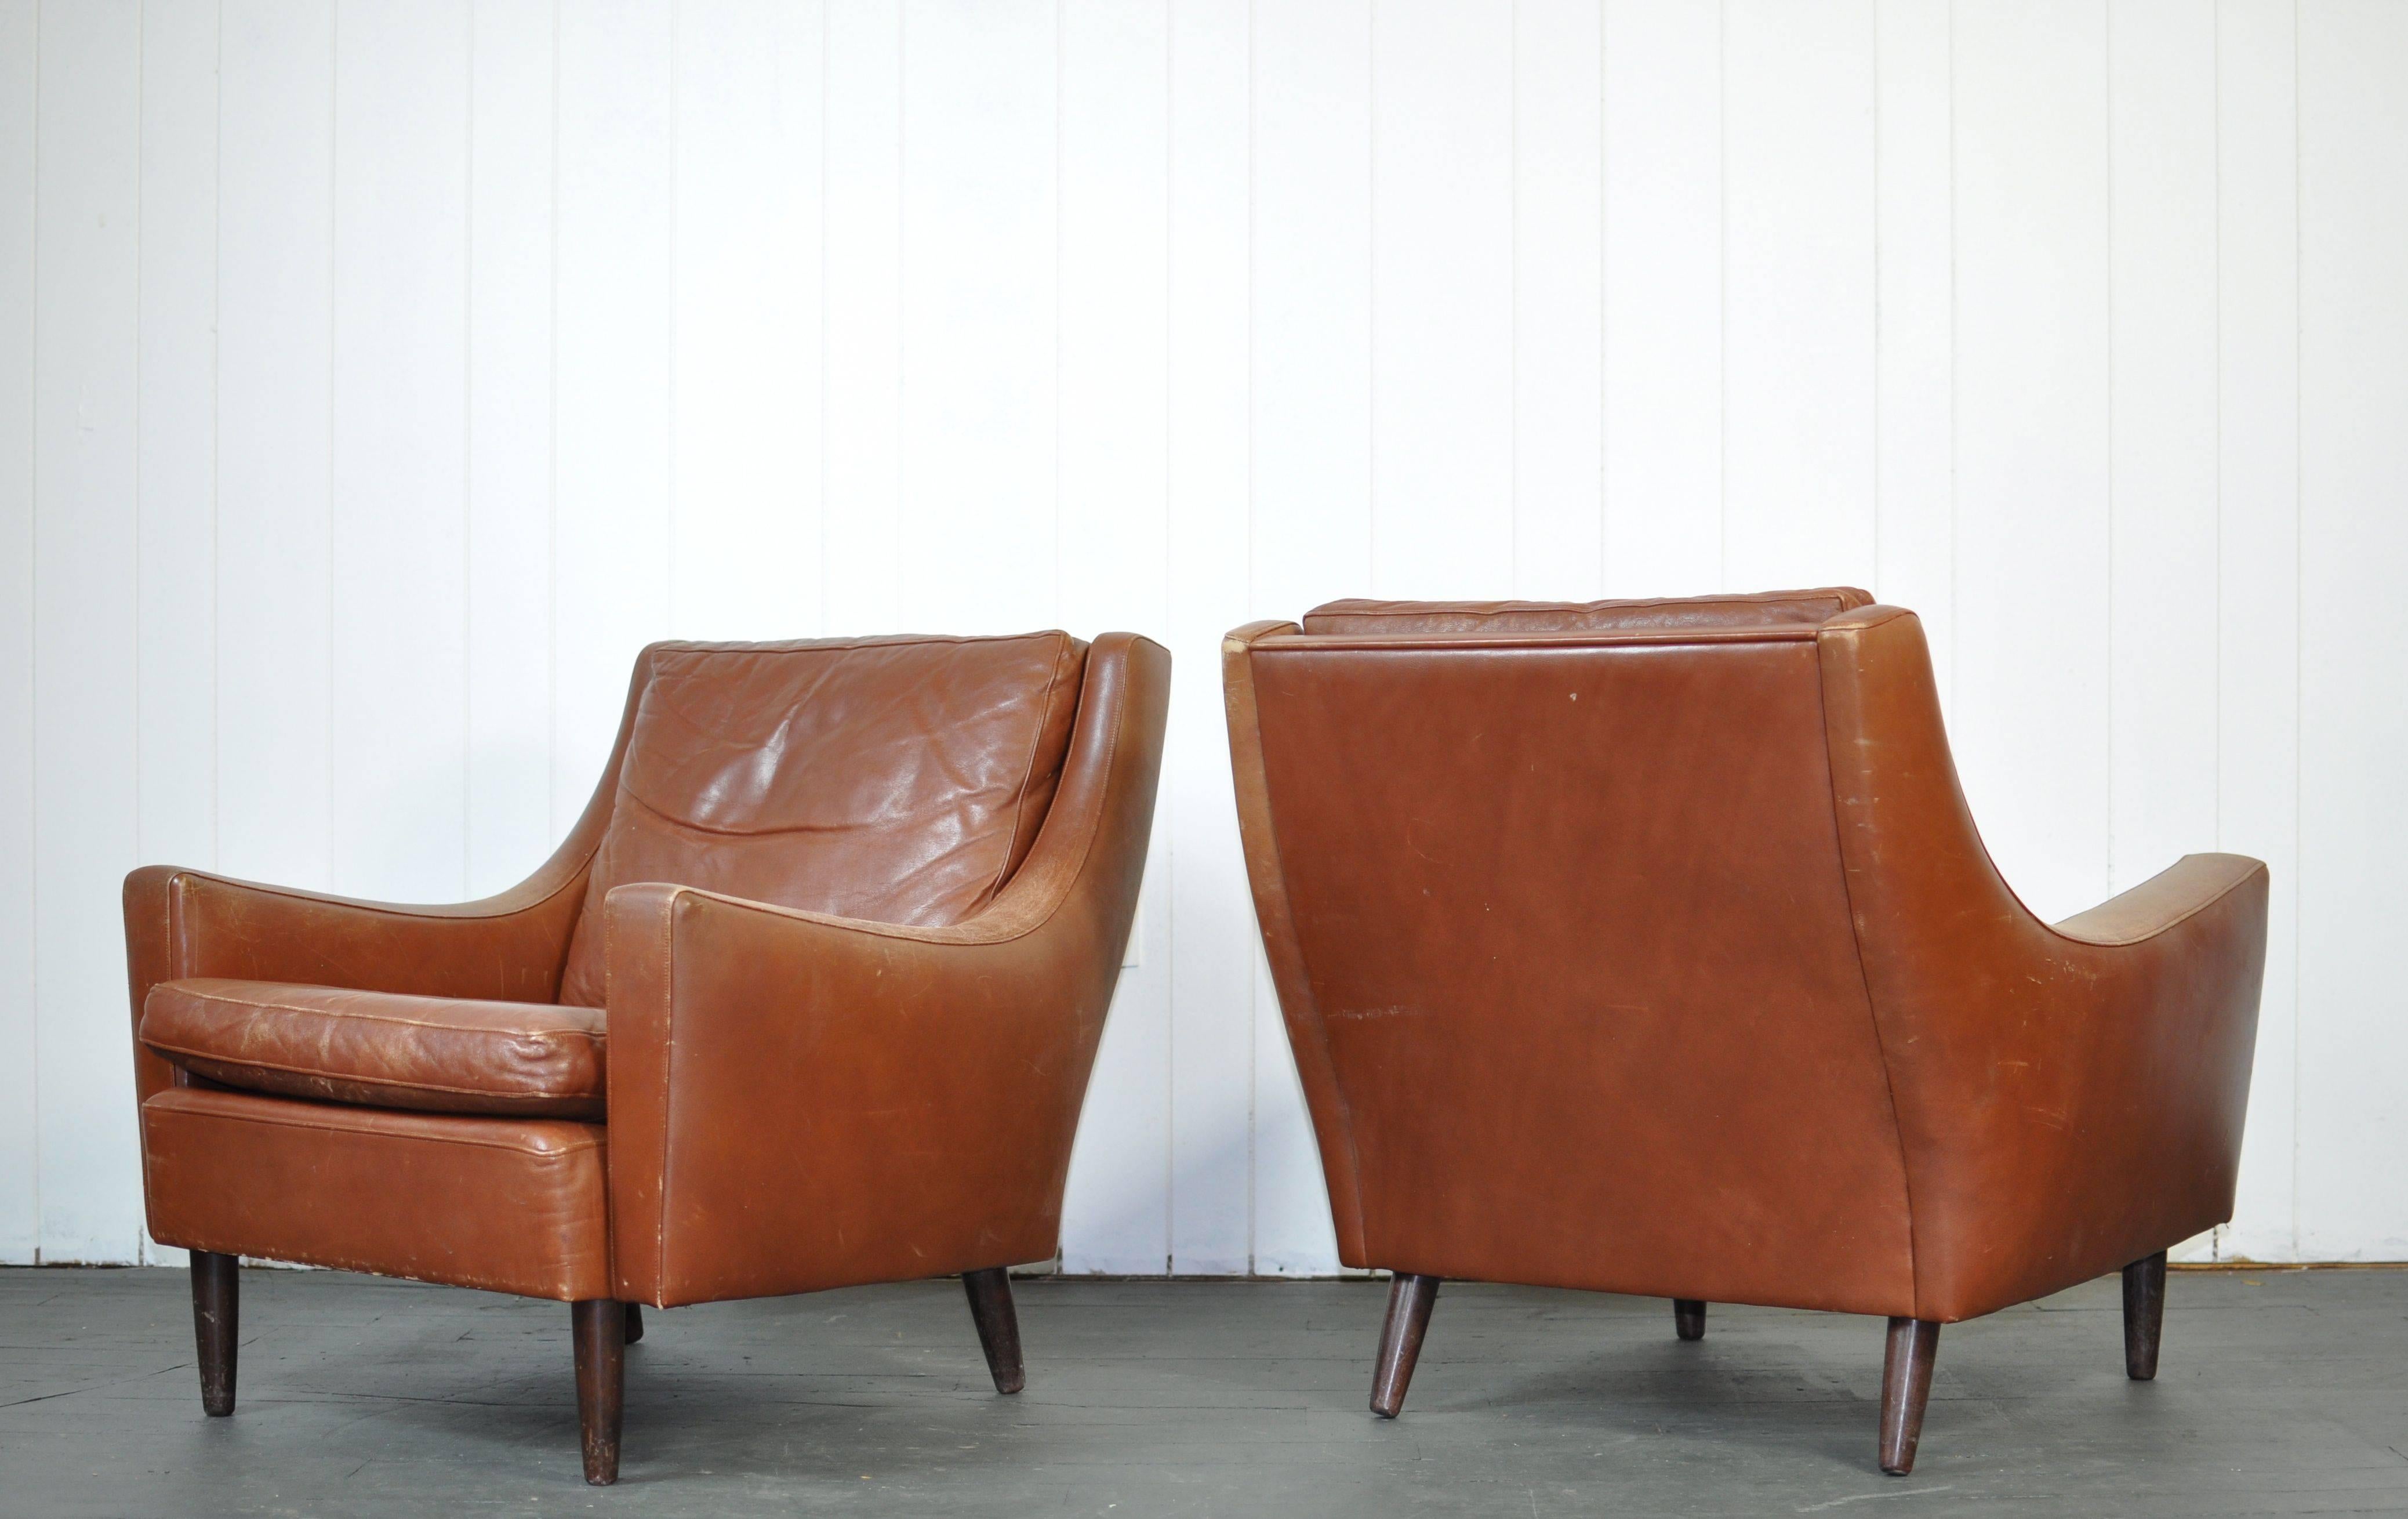 Pair of Danish leather lounge chairs with teak legs. 

Please inquire regarding trade pricing.